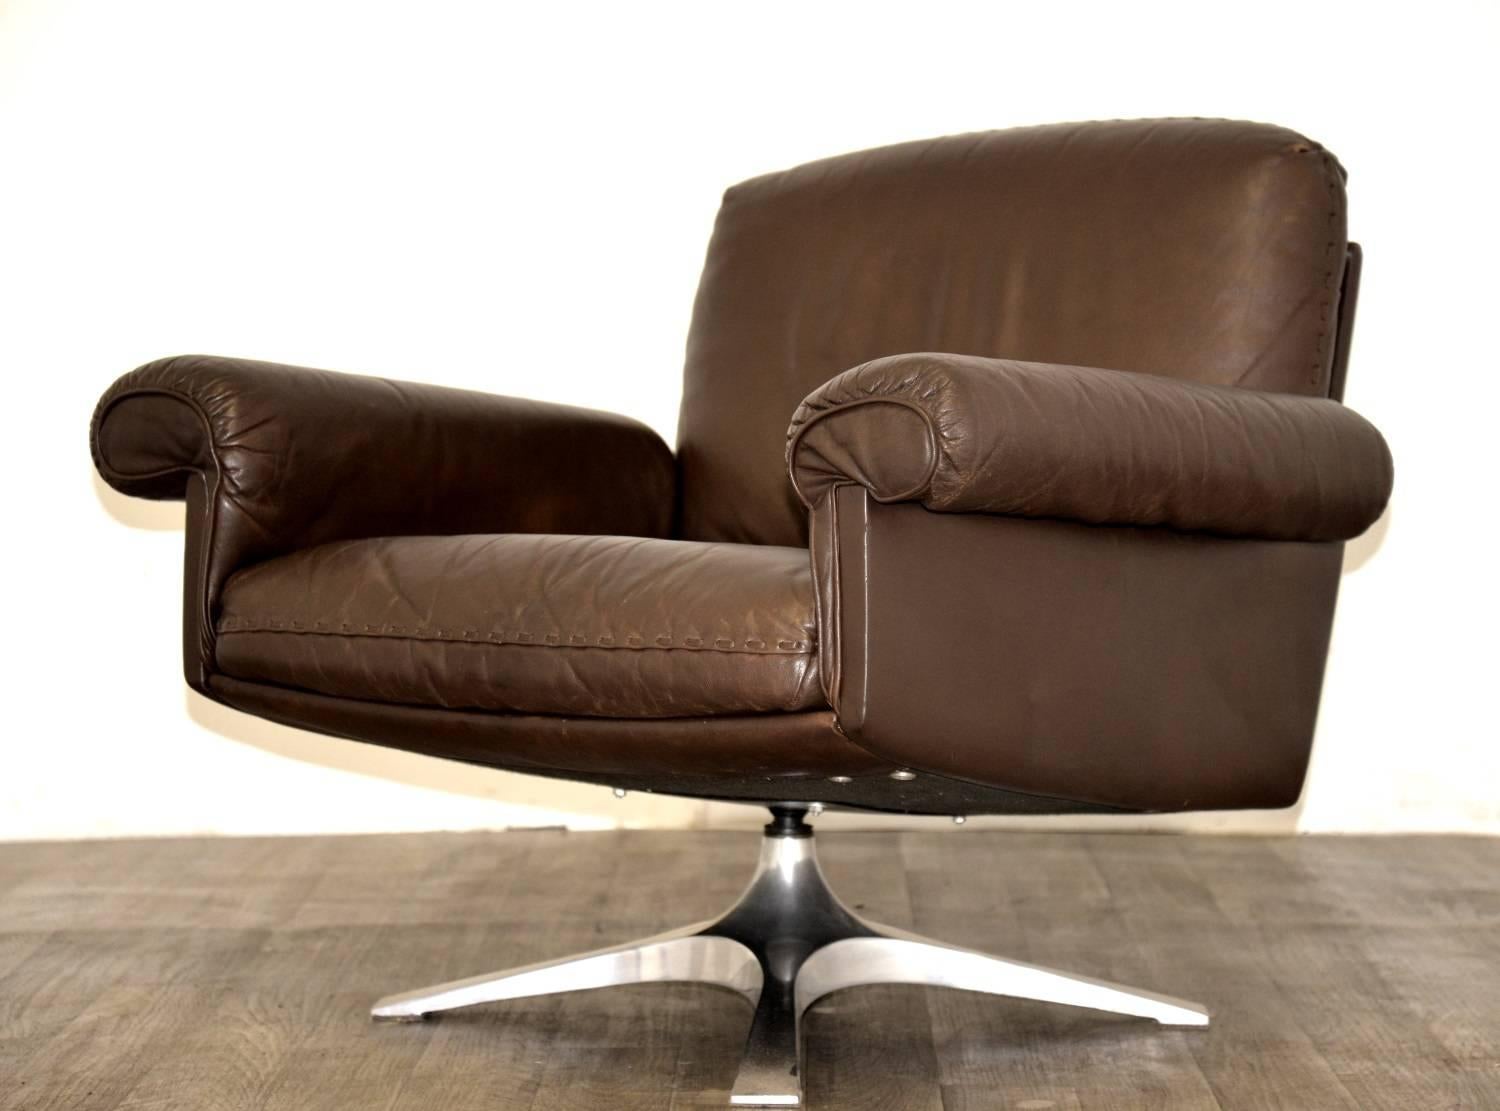 Discounted airfreight for our US and International customers ( from 2 weeks door to door)

We are delighted to bring to you a vintage 1970`s de Sede DS 31 lounge armchair in soft brown aniline leather with superb whipstitch edge detail. This swivel